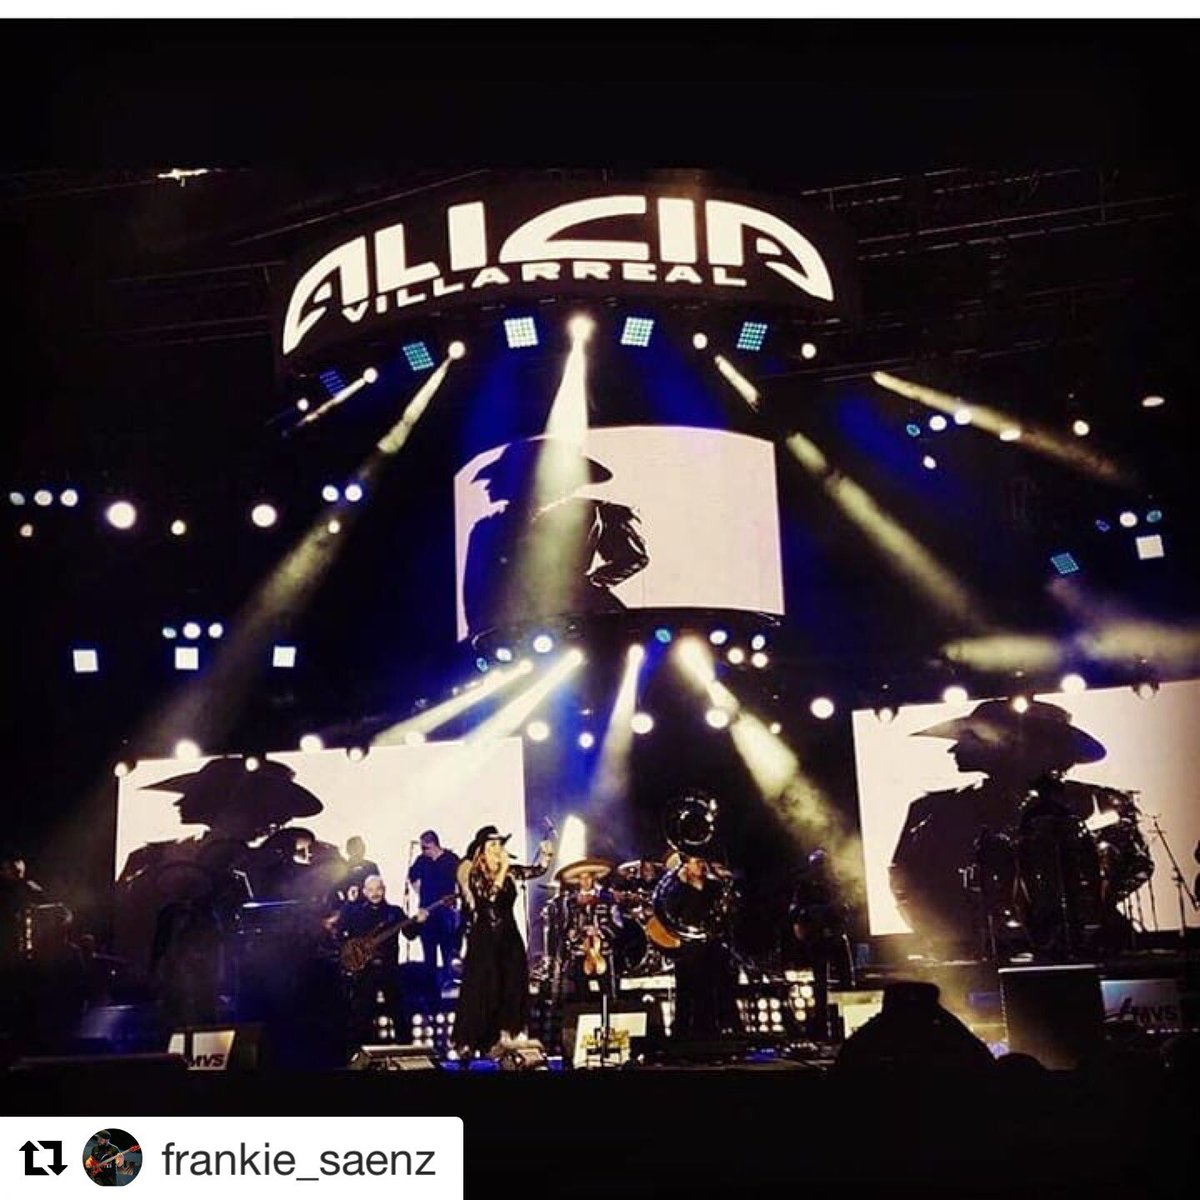 We’re so pleased that our strings get used by great players like Frank. #WEshapetone #Repost @FrankieSaenz with @get_repost
・・・
#aliciavillarreal #job #apexstrings #musically #mx @LaVillarrealMx